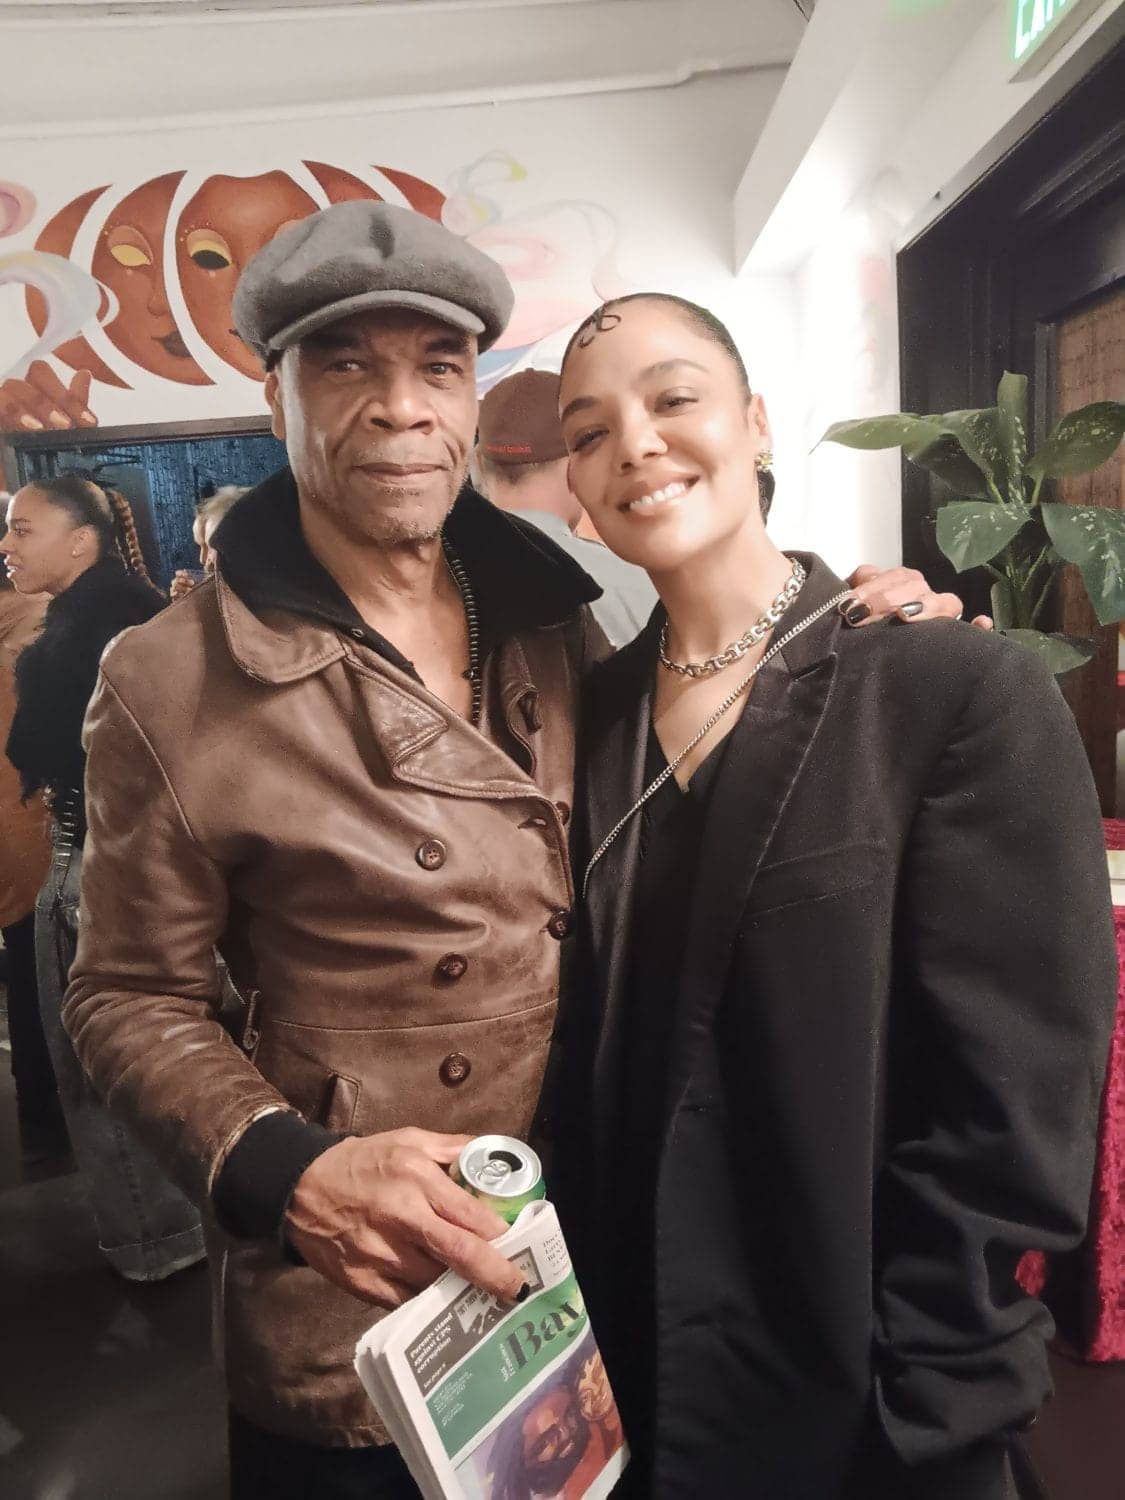 Photo_-Playwright-Marc-Anthony-Thompson-and-actress-Tessa-Thompson, Come see 'The Nigger Lovers’, Culture Currents Local News & Views News & Views 